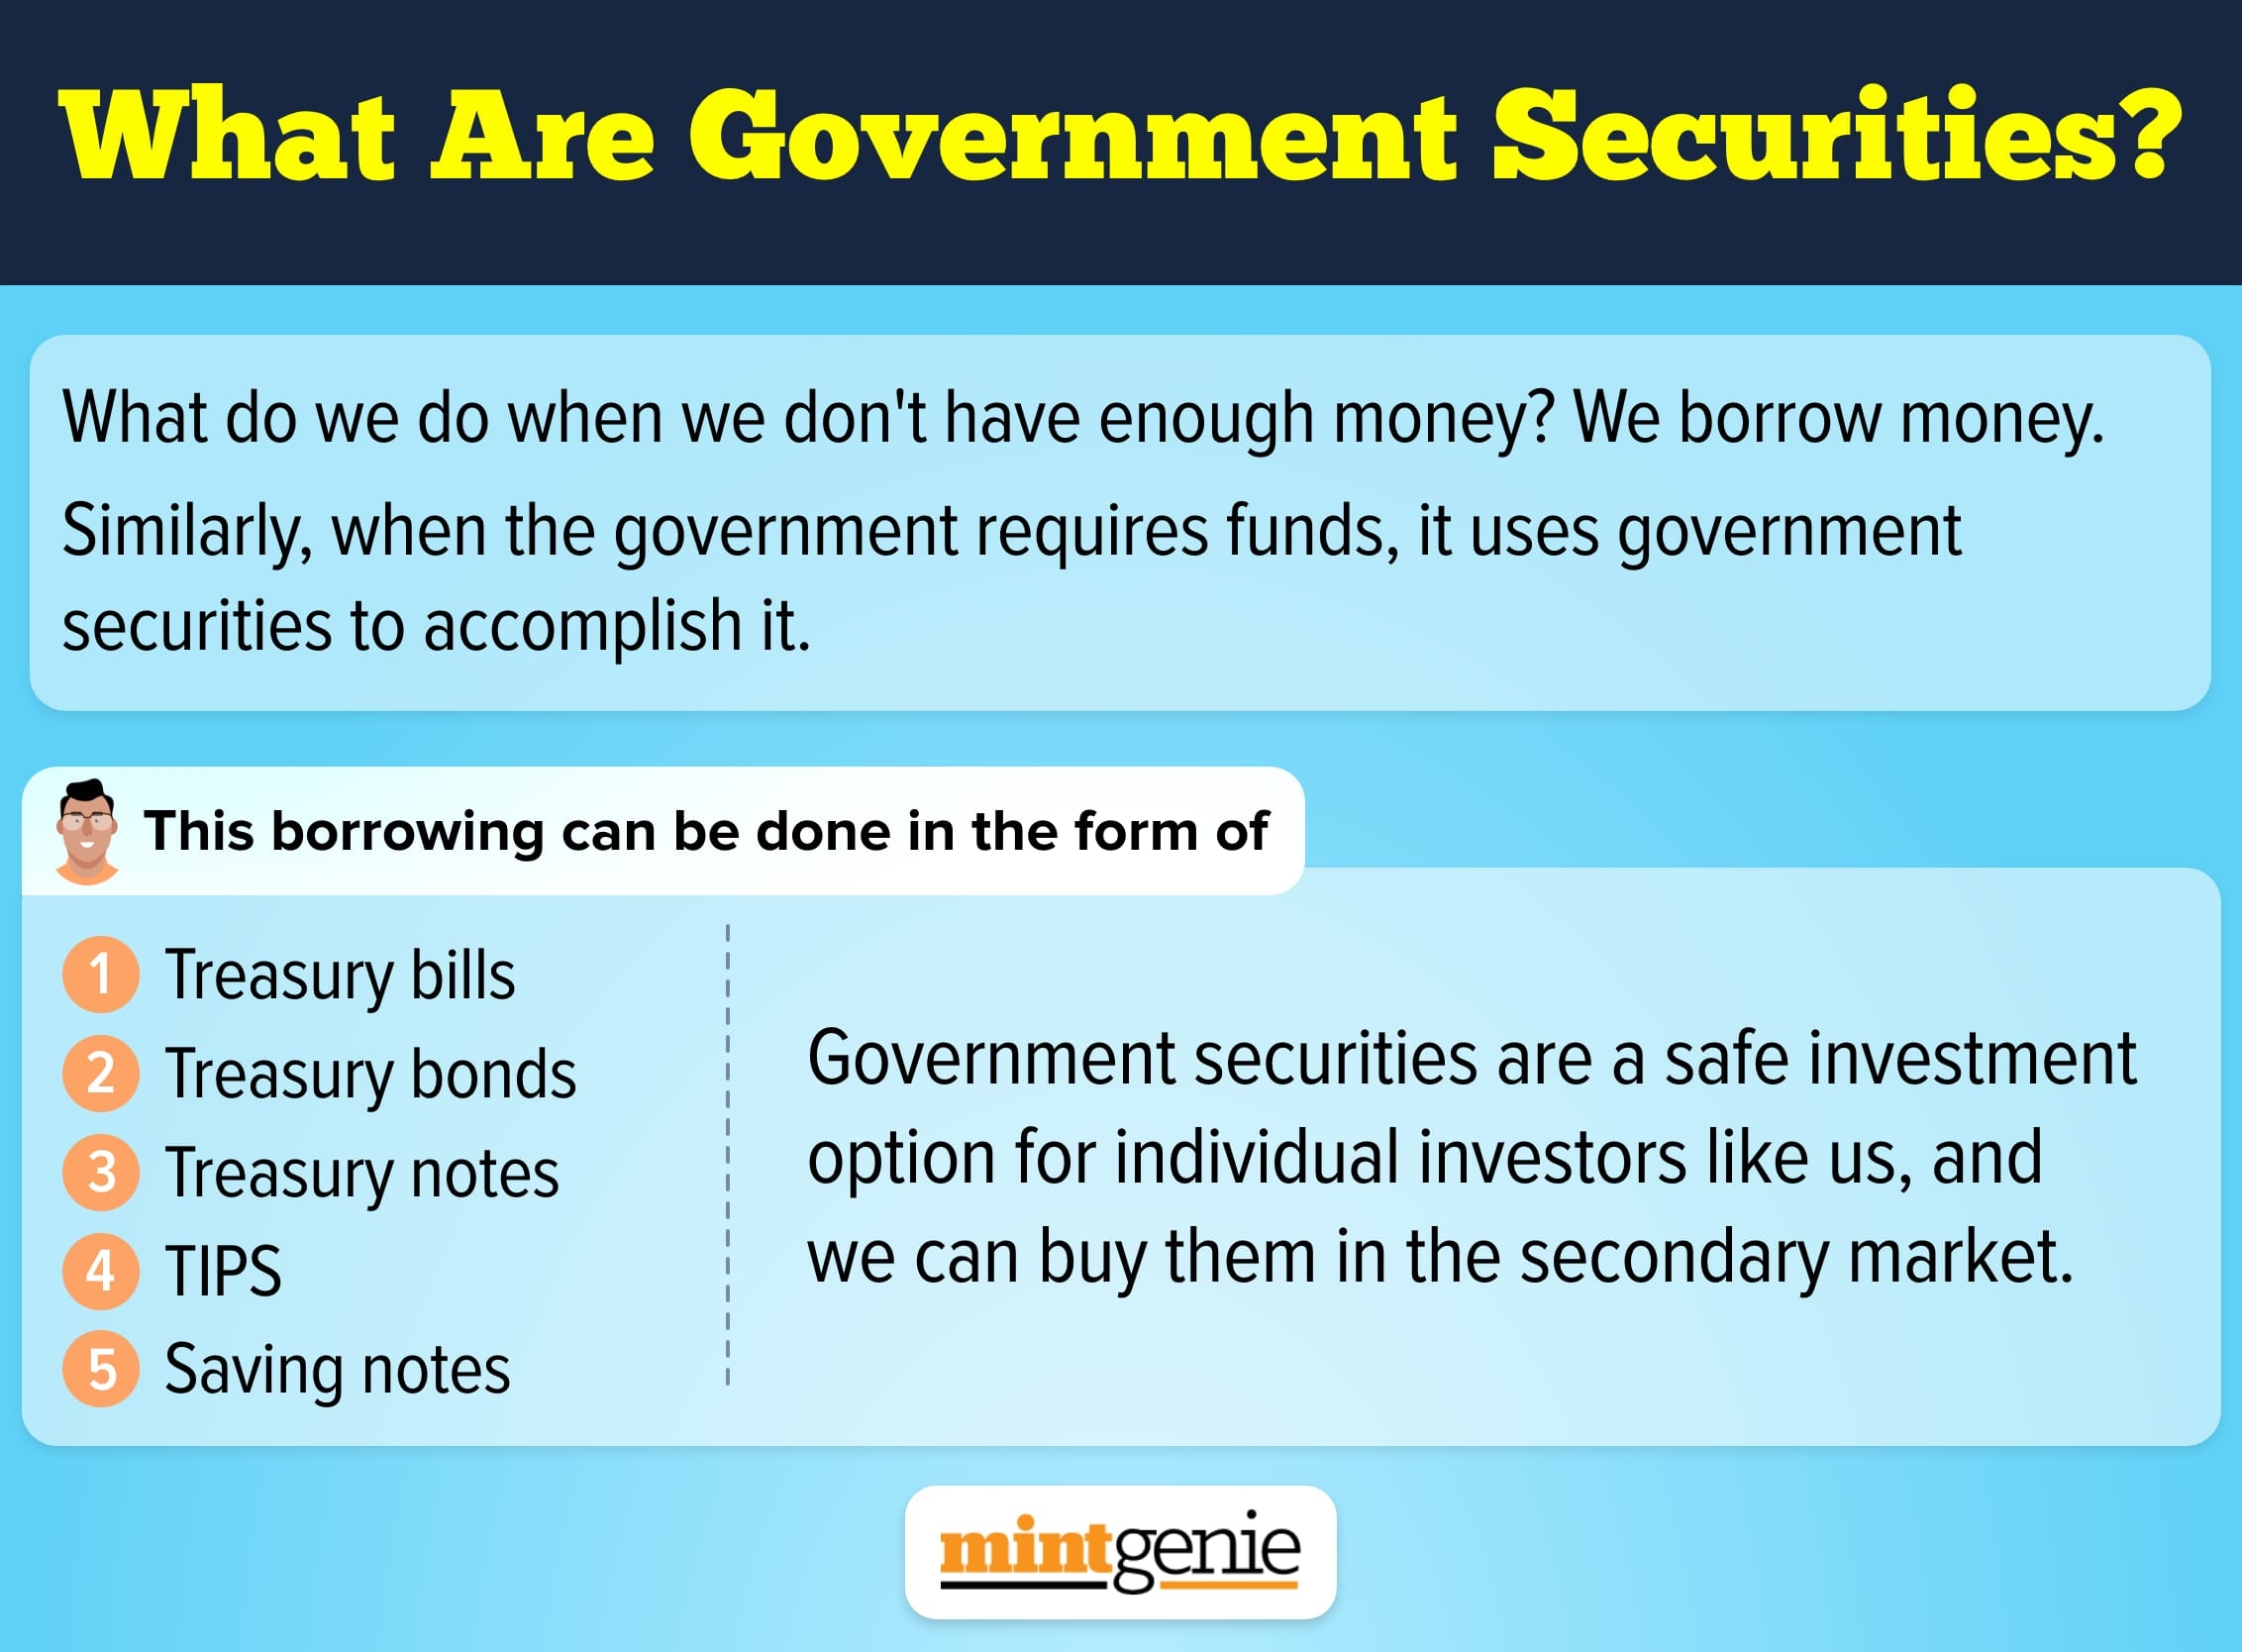 Government securities are tradable debt instruments that the government offers in the form of bonds, treasury bills, or notes.